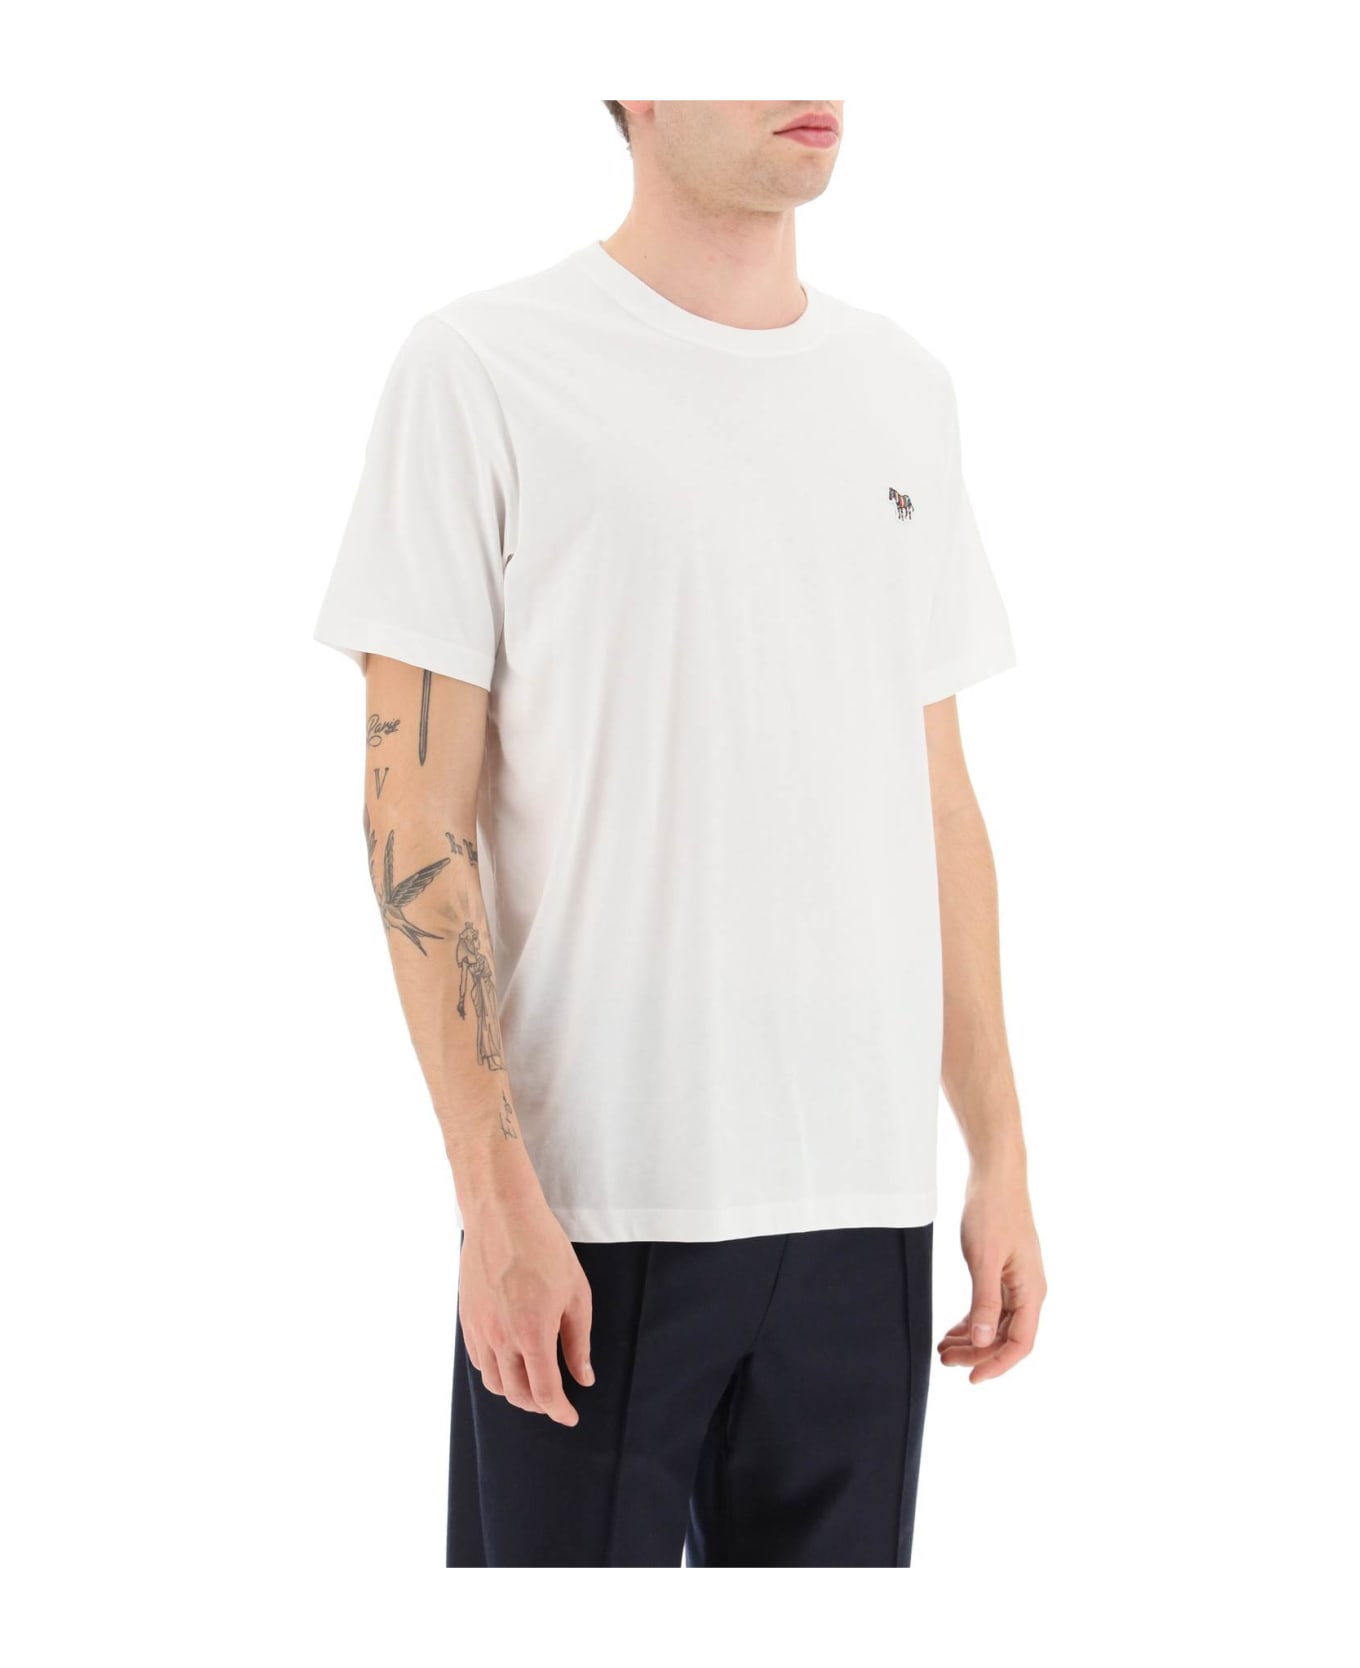 PS by Paul Smith Zebra Patch T-shirt - WHITE (White)